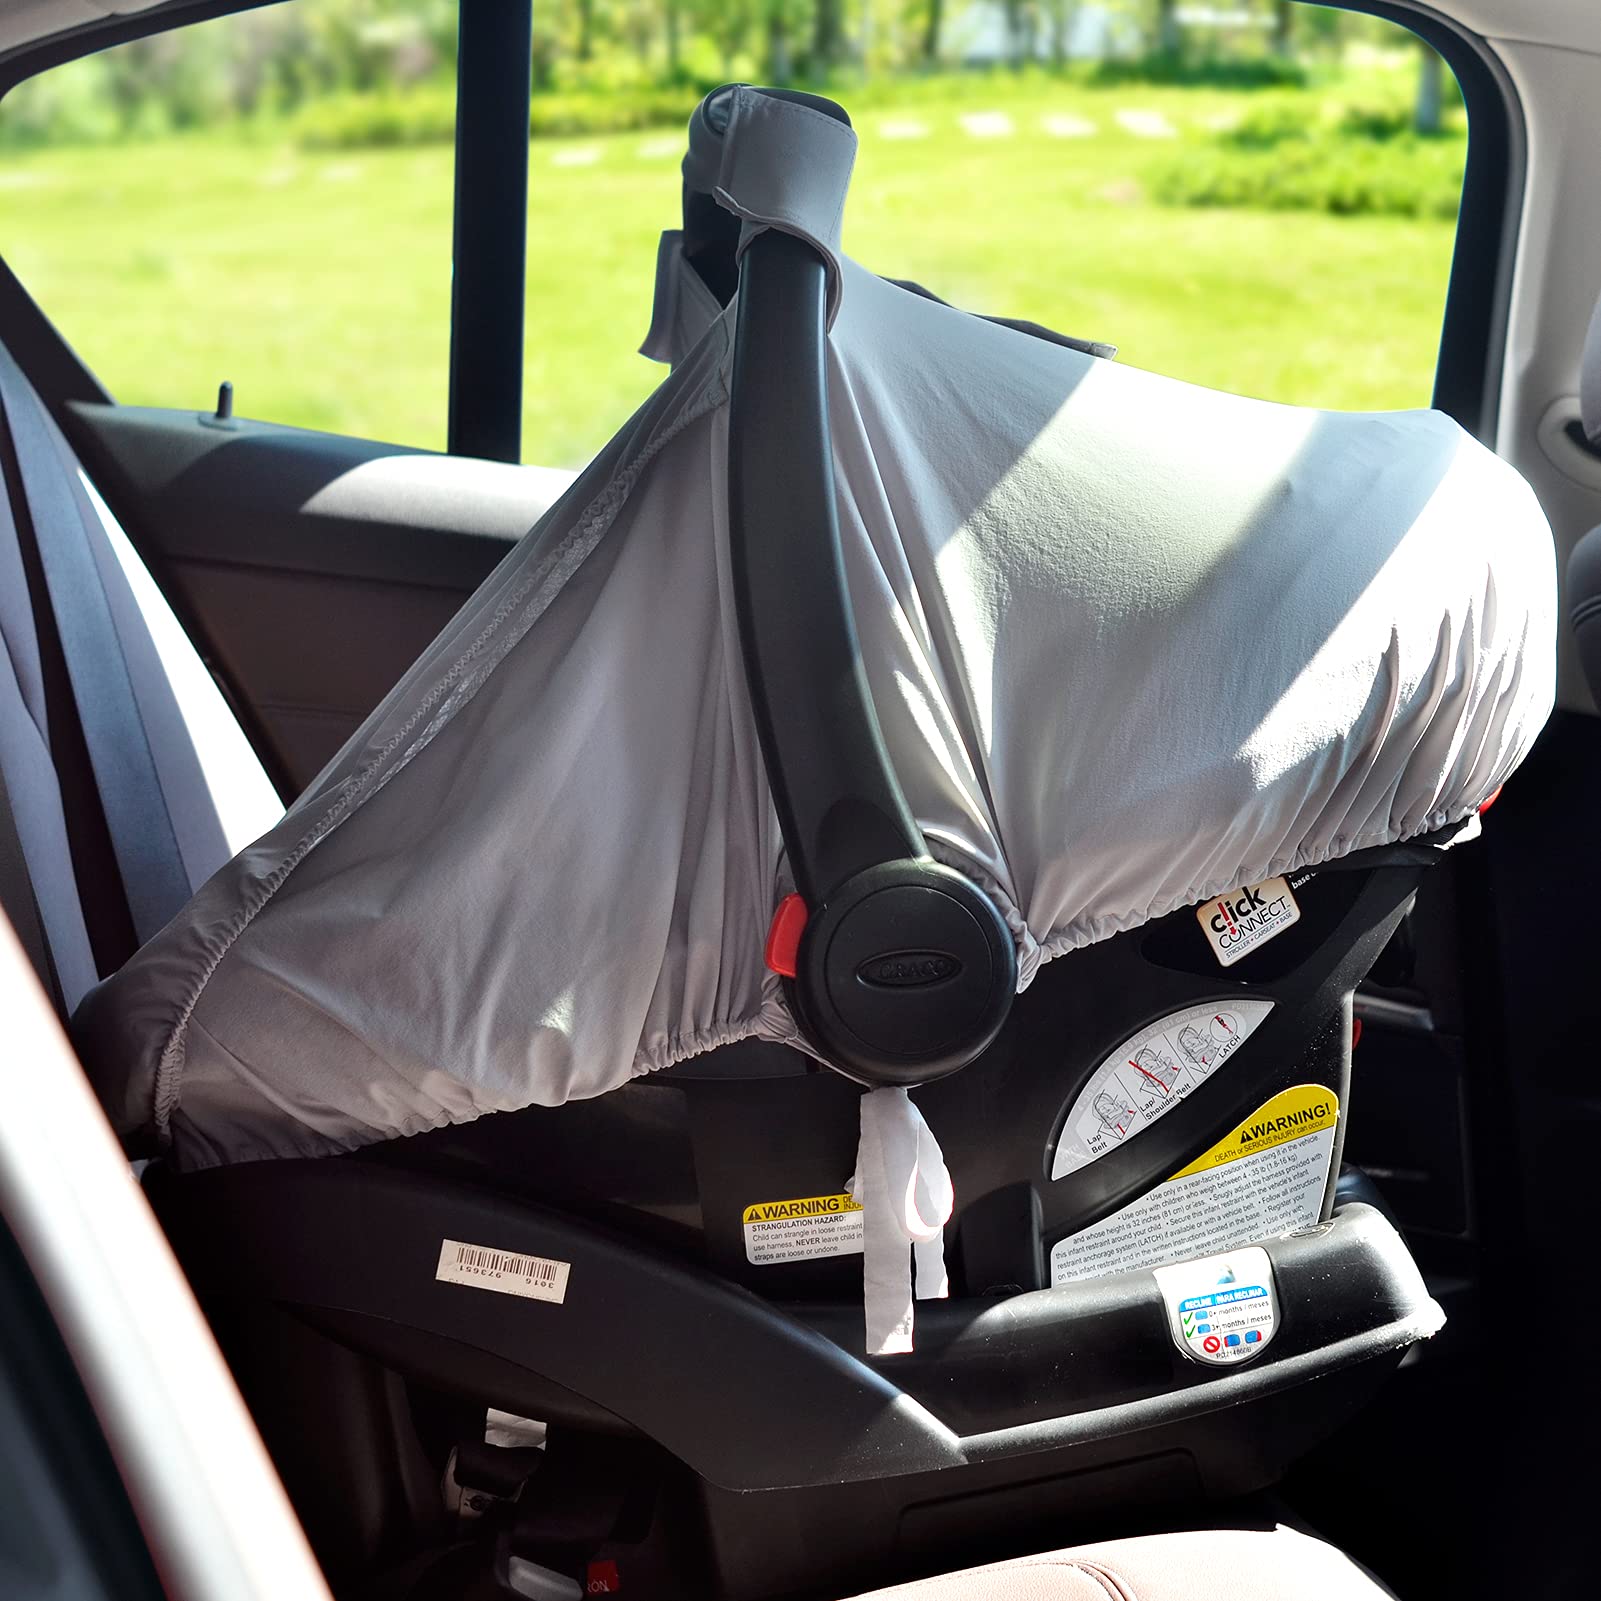 Cribino Car Seat Covers for Babies, Infant Car seat Cover, Canopy with Breathable Peekaboo, Pivacy Sun Shade & Bug Net for Newborn, Carrier Covers for Boys Girls Spring Summer Baby Shower Gifts(Grey)